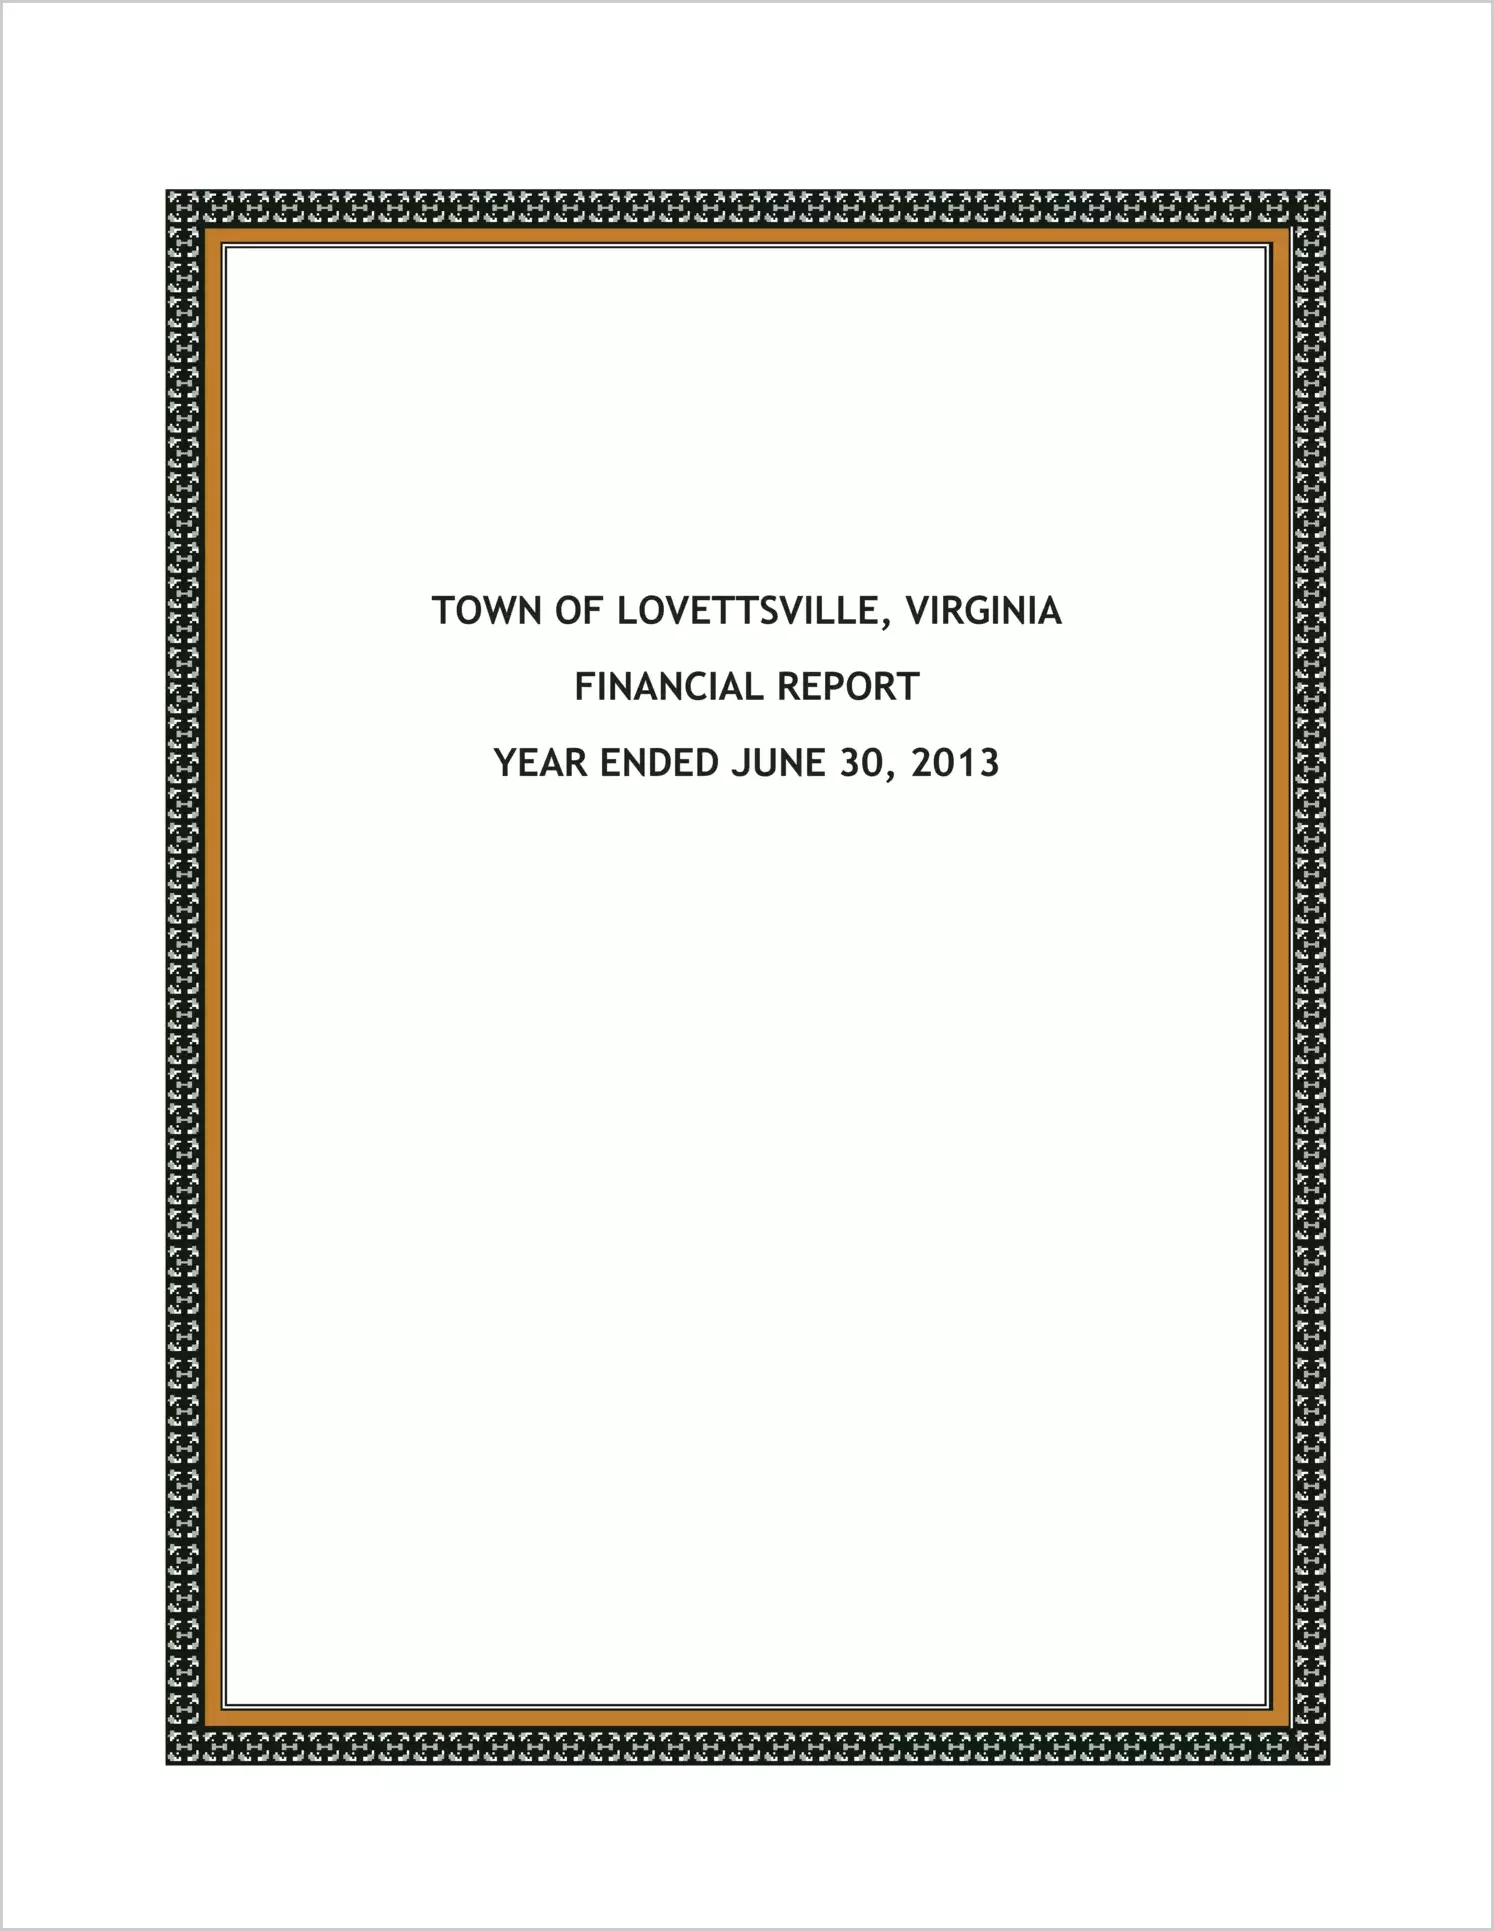 2013 Annual Financial Report for Town of Lovettsville